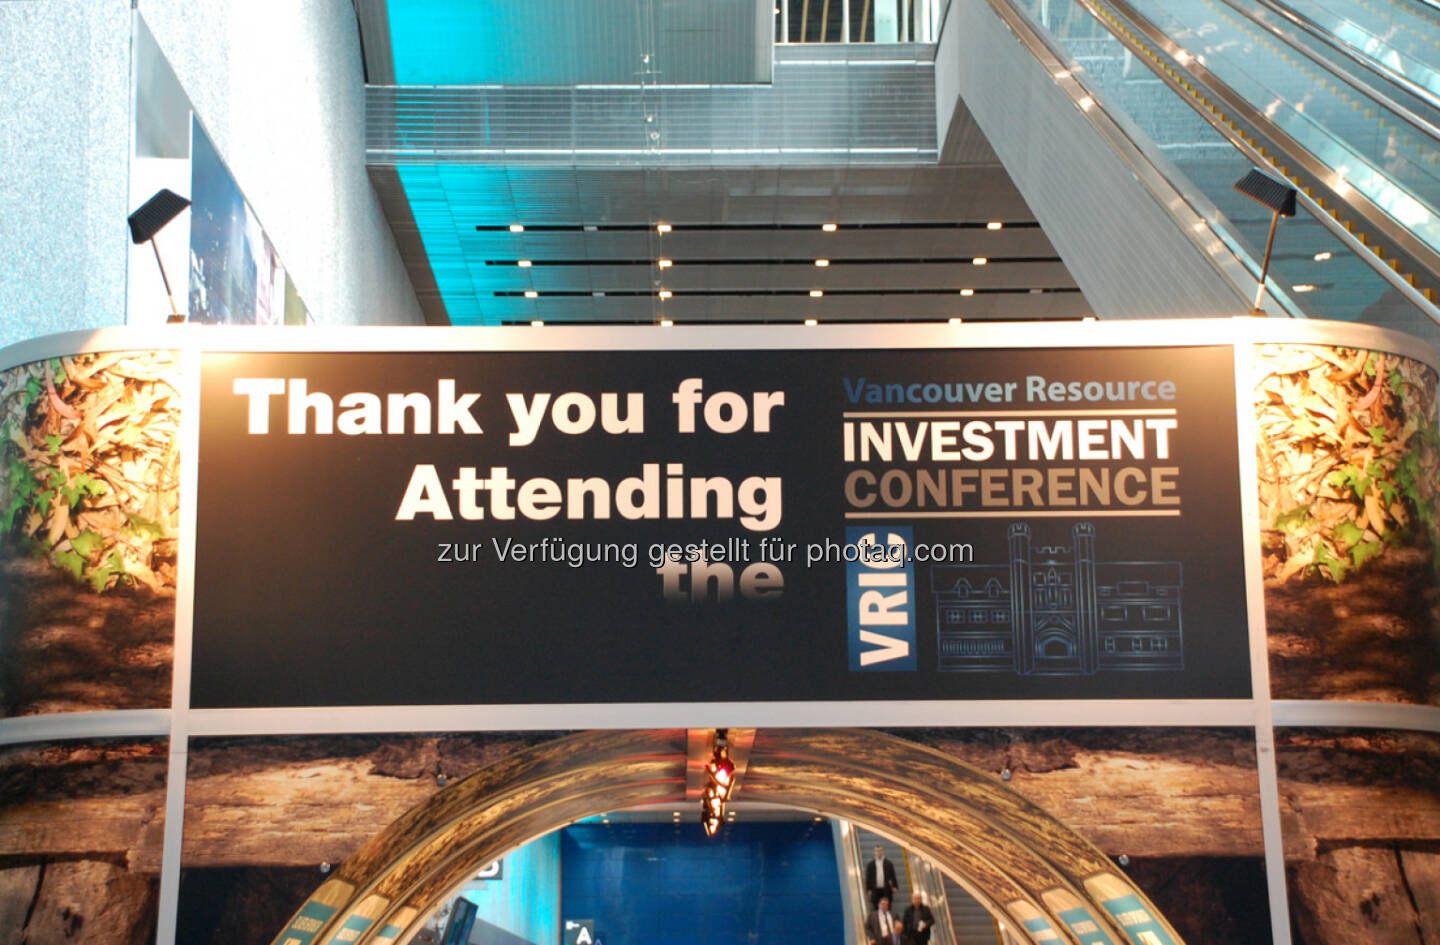 Thank you for attending the Vancouver Resource Investment Conference